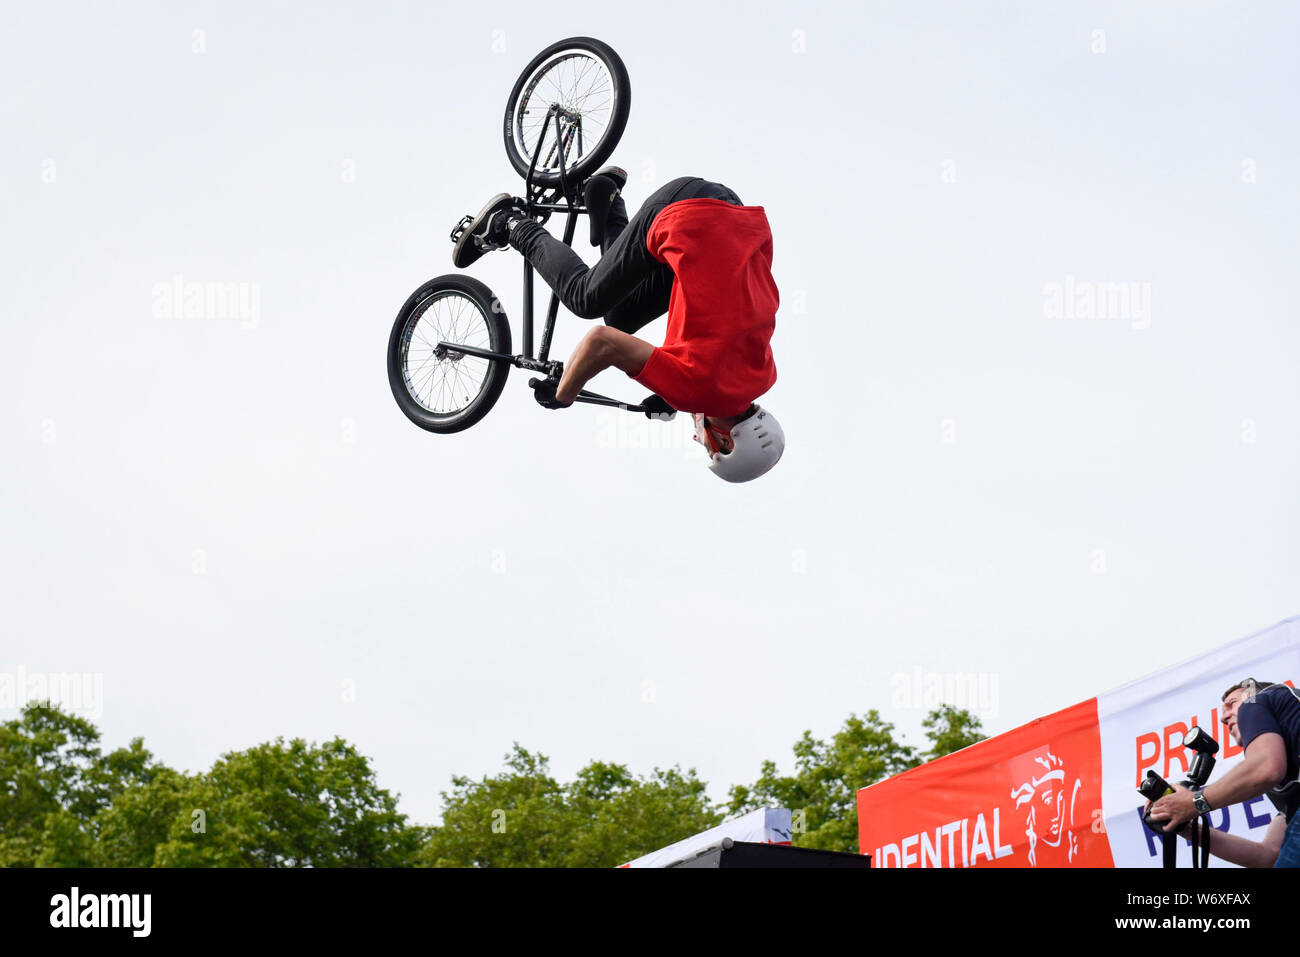 London, UK.  3 August 2019.  A BMX rider takes part in the Air To The Throne BMX Mini Ramp competition trying to perform the most difficult and visually stunning stunts.  The event is taking place in Green Park, one of six cycling festival zones, during Prudential RideLondon FreeCycle, a two day celebration of cycling taking place in the capital with over 100,000 people participating over the weekend. Credit: Stephen Chung / Alamy Live News Stock Photo